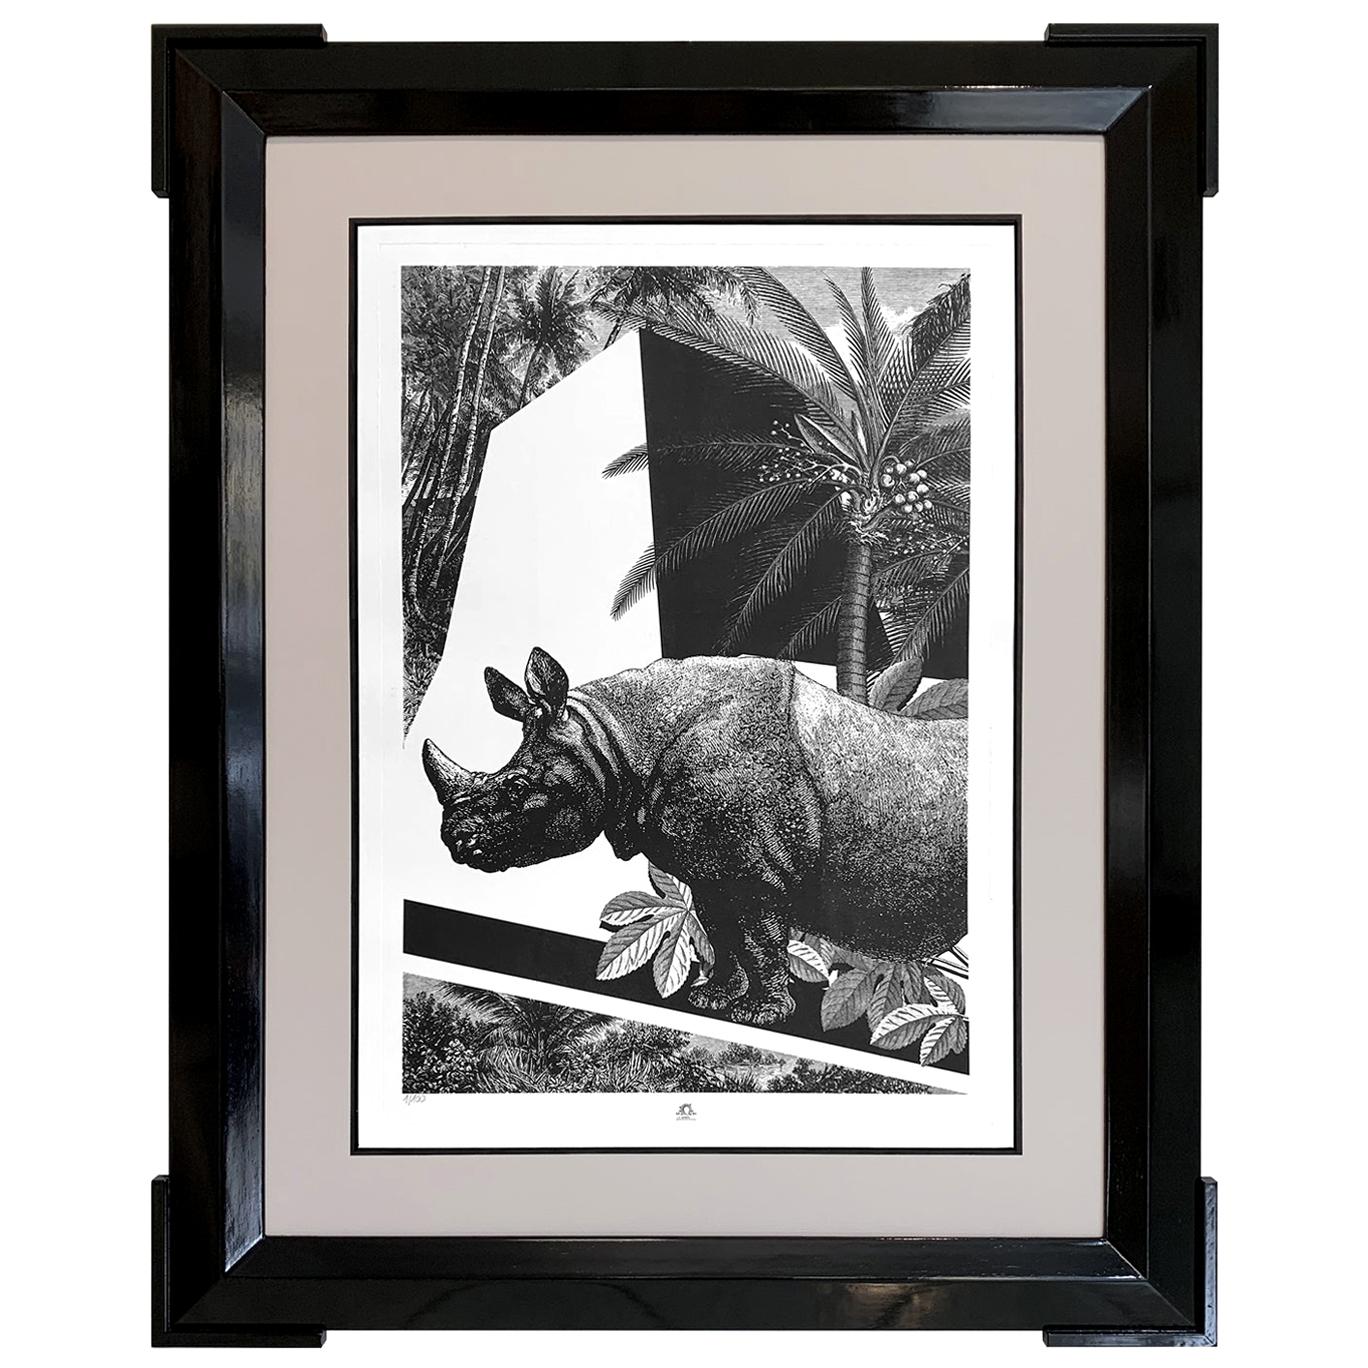 Italian handmade limited edition print "Black & Wild" Collection For Sale